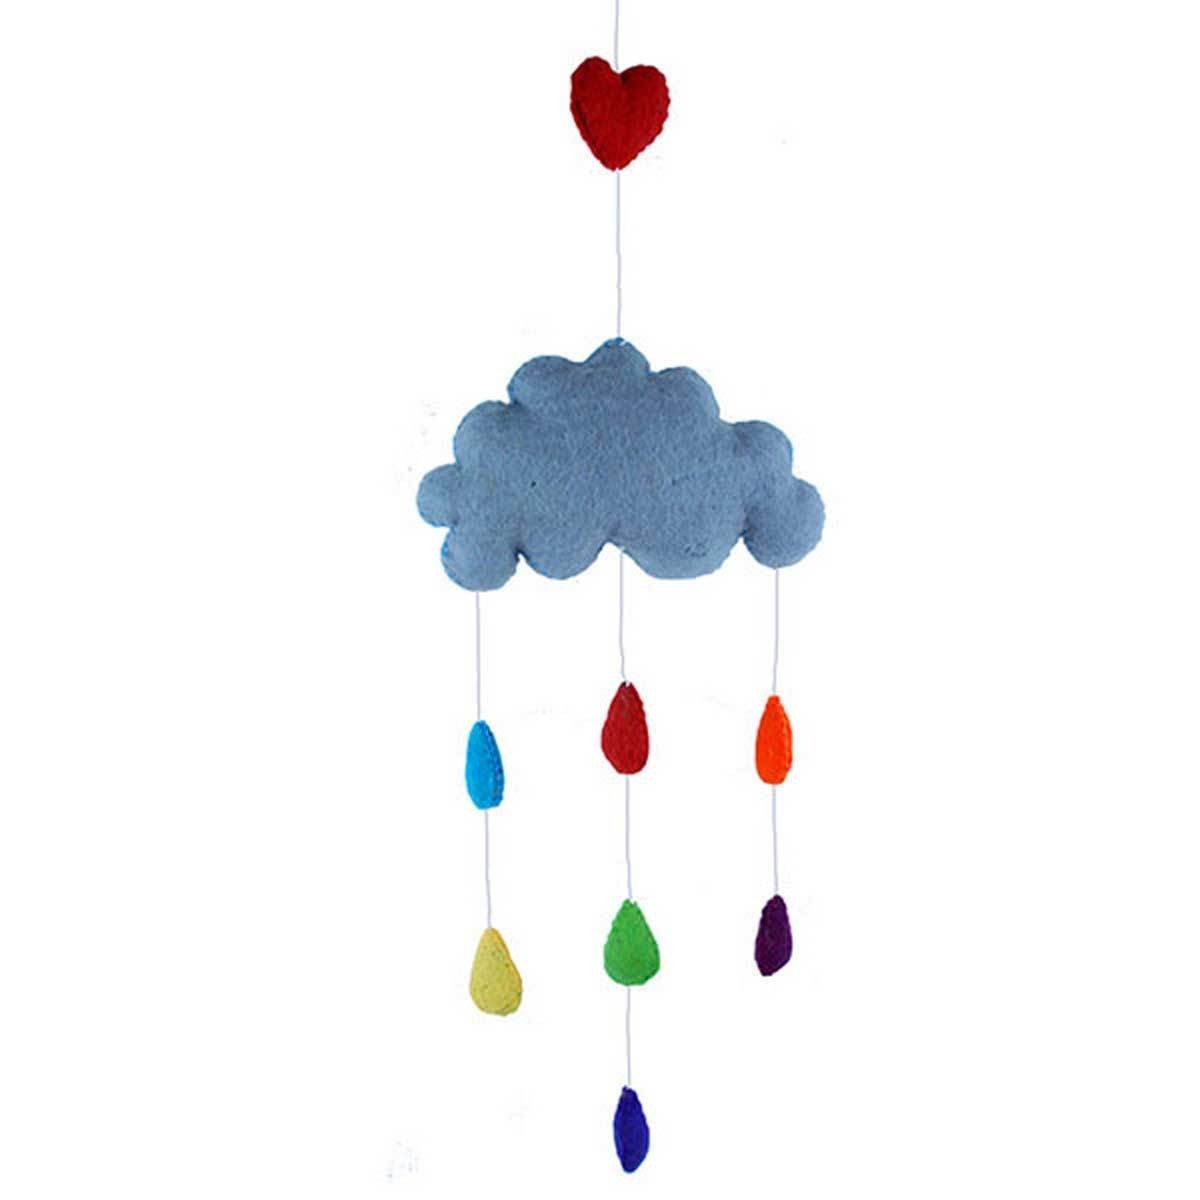 This Global Groove Life, handmade, ethical, fair trade, eco-friendly, sustainable, Rainbow Raindrop and Heart felt mobile, was created by artisans in Kathmandu Nepal and will be a beautiful and fun addition to your home.